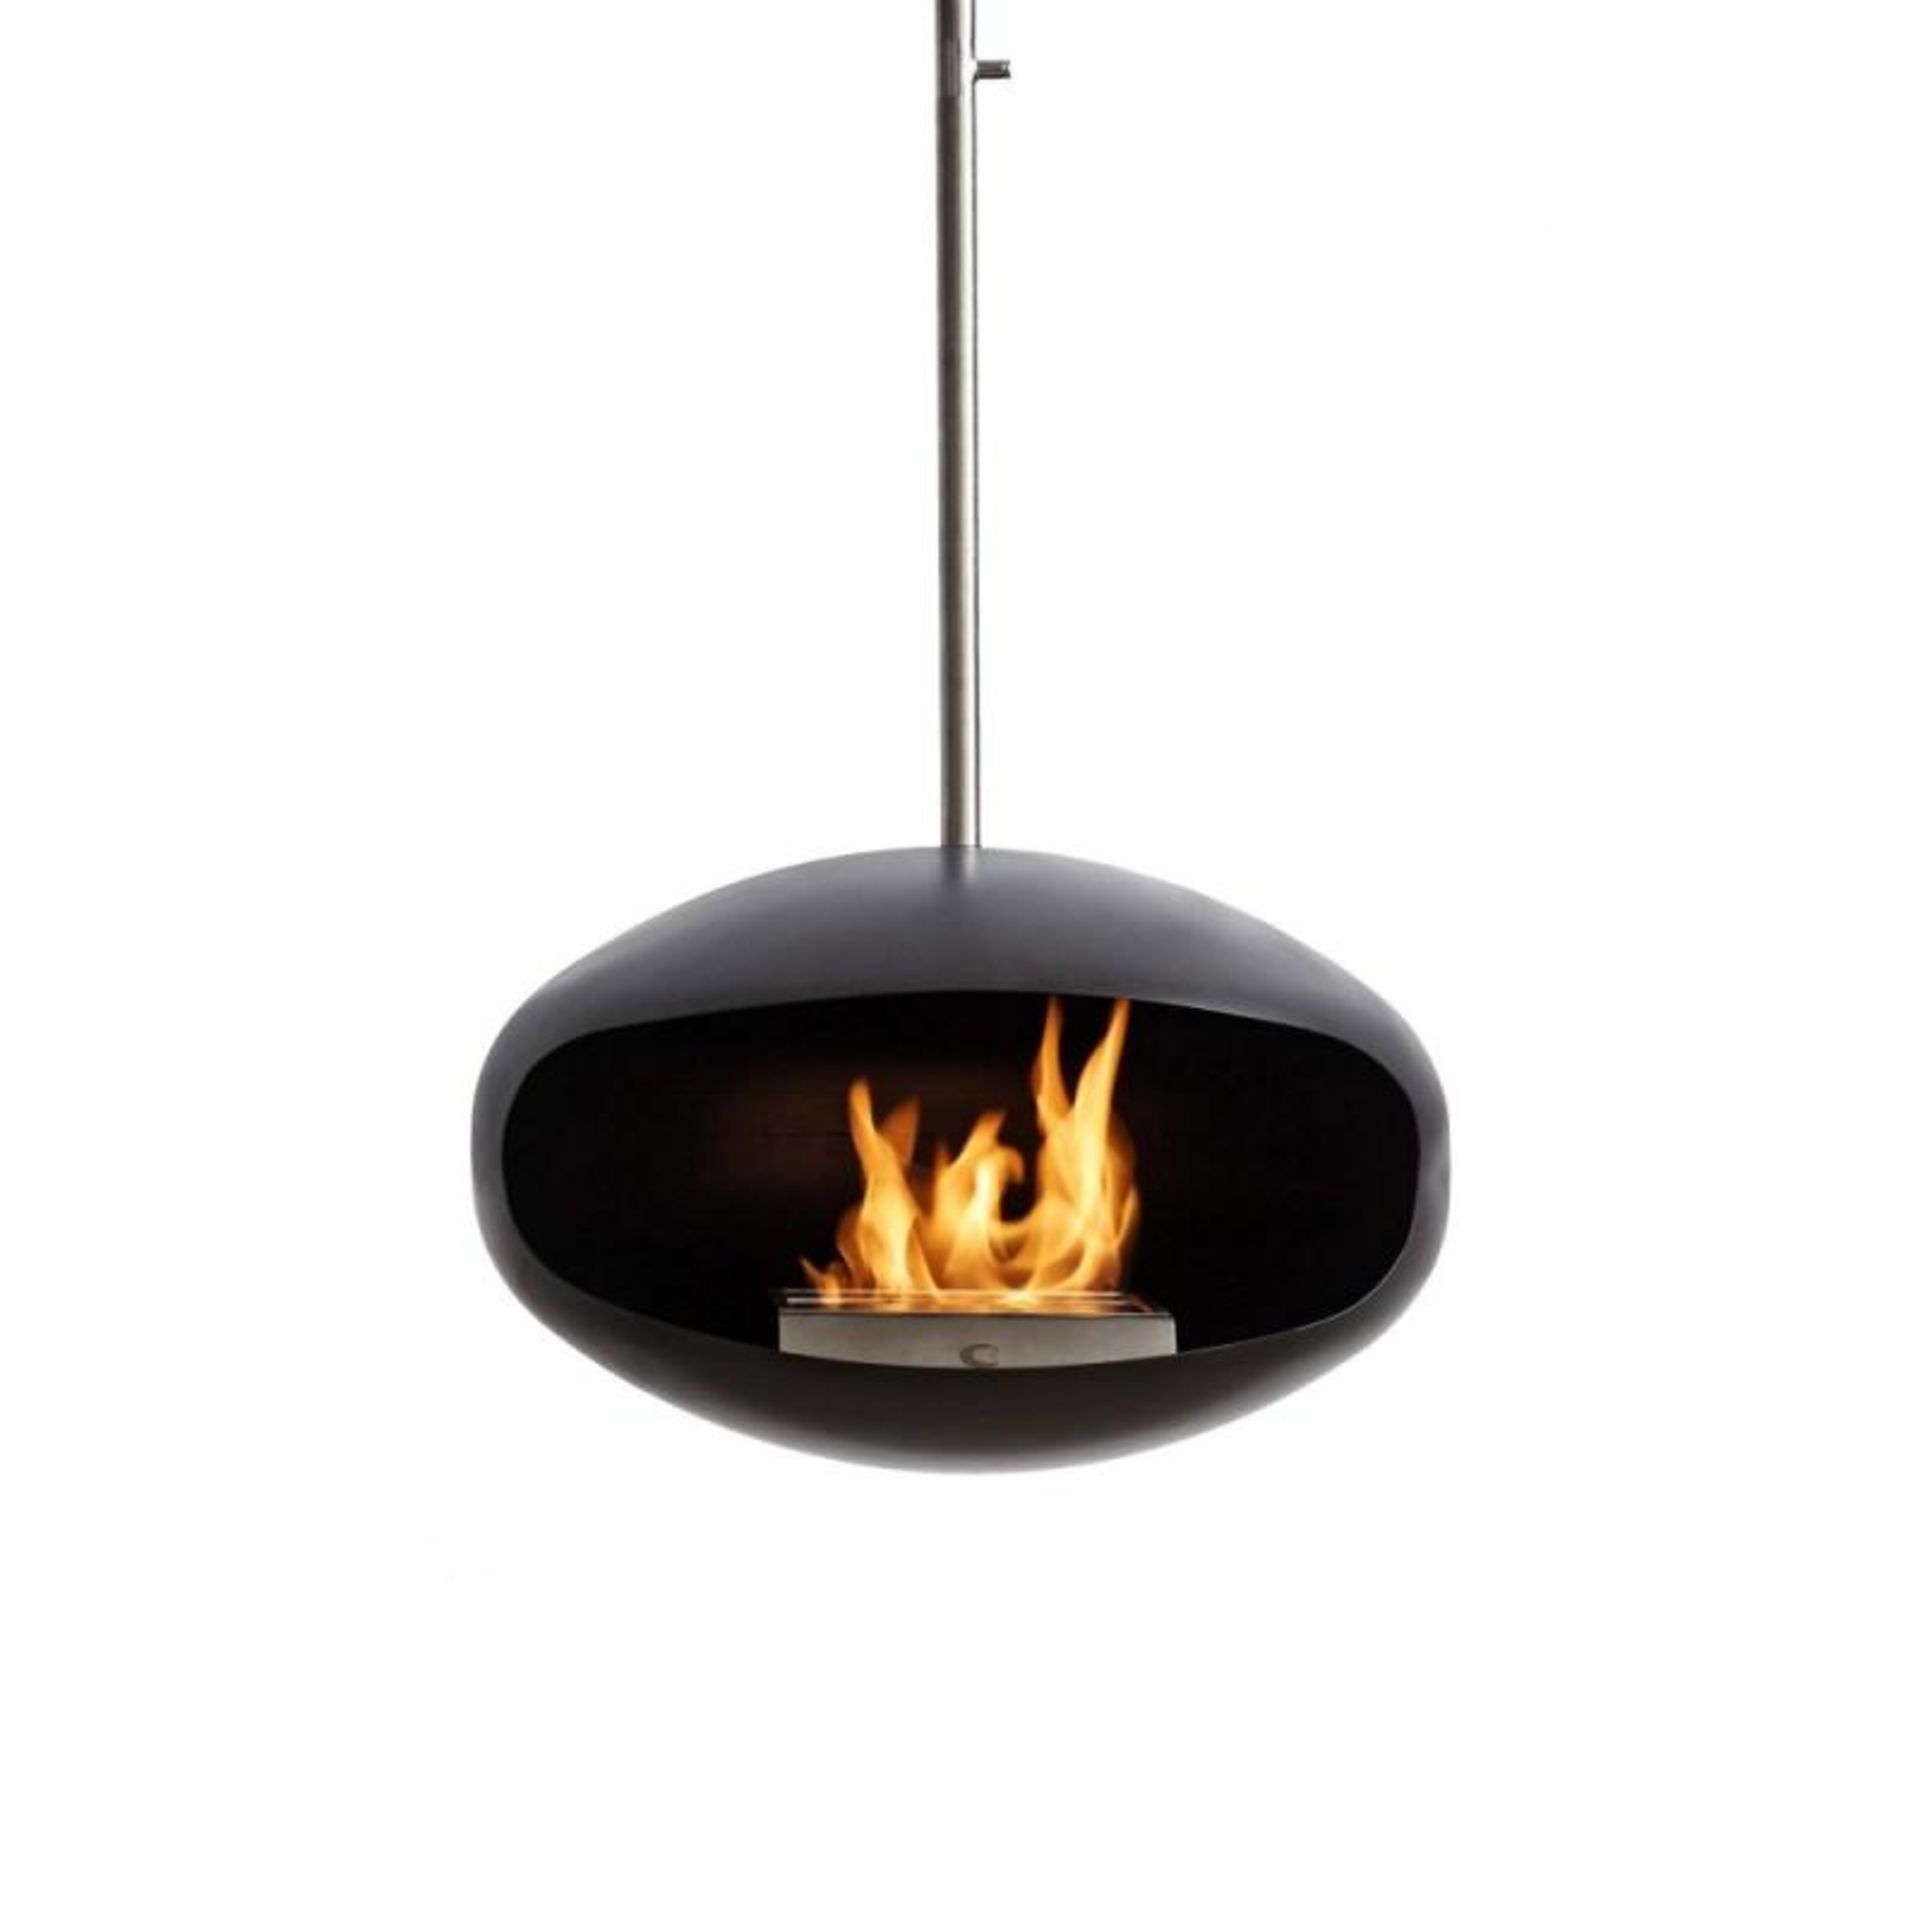 1 x Aries Hanging Cocoon Fireplace Finished In Black - CL439 - Location: Ilkey LS29 - Used In Excel